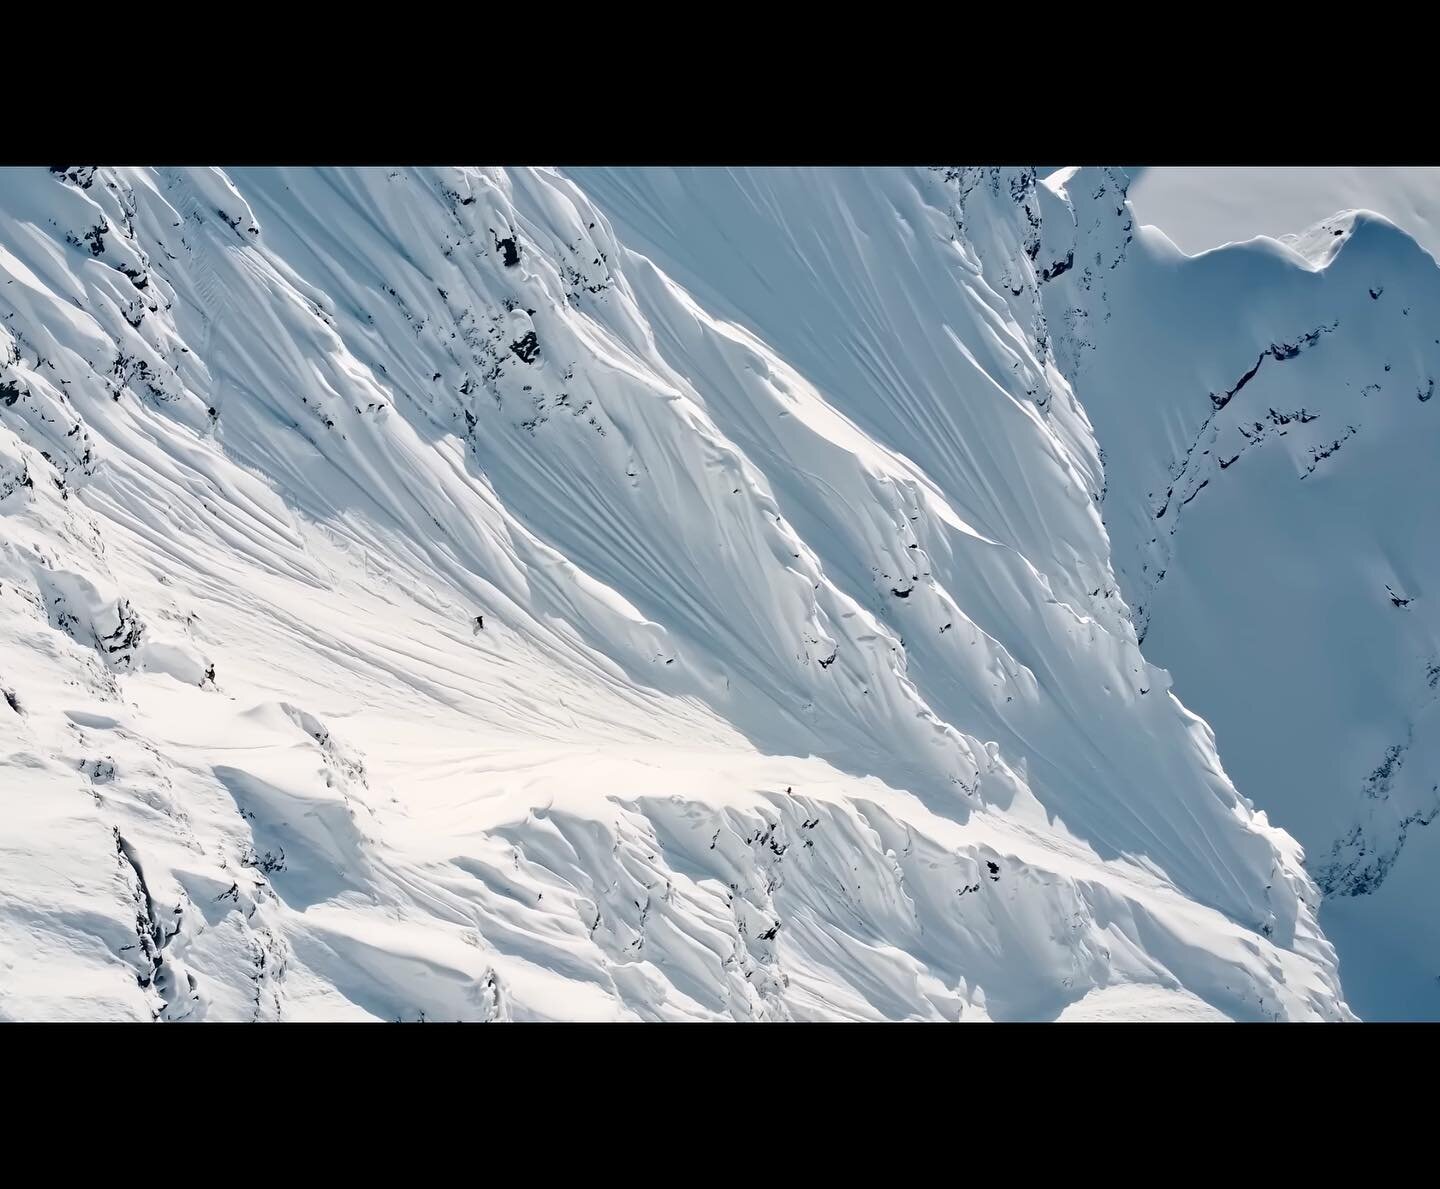 In the spring of 2022, @kriskopa dedicated most of his season to snowboarding some of the most intimidating lines on Jiehkkev&aacute;rri, the highest peak in Norway's Lyngen Alps.

The South Face would become the main objective.  &ldquo;The White Gia